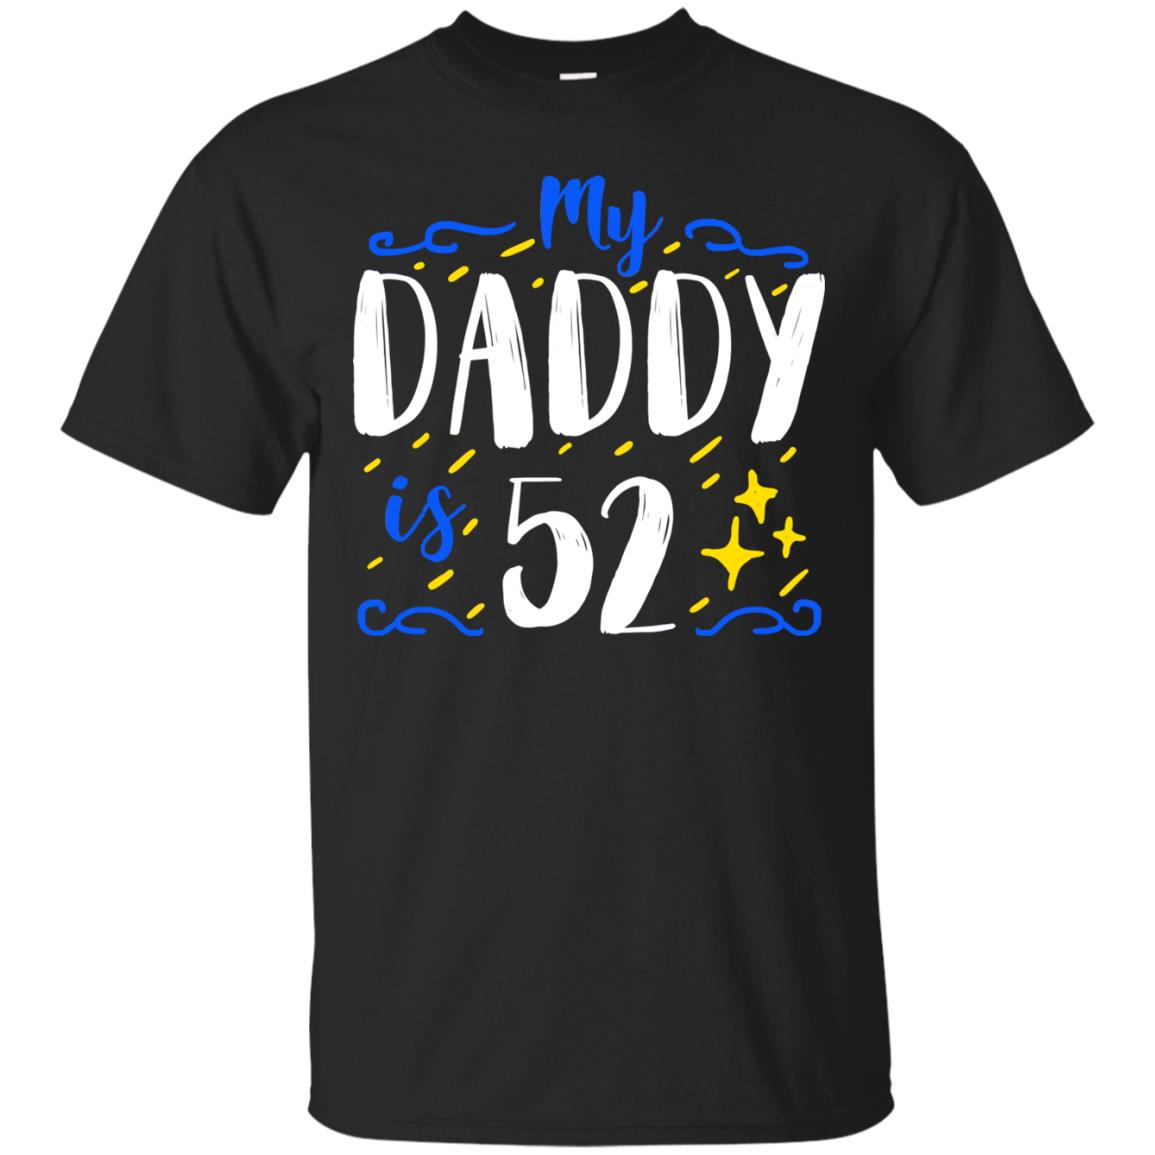 My Daddy Is 52 52nd Birthday Daddy Shirt For Sons Or DaughtersG200 Gildan Ultra Cotton T-Shirt